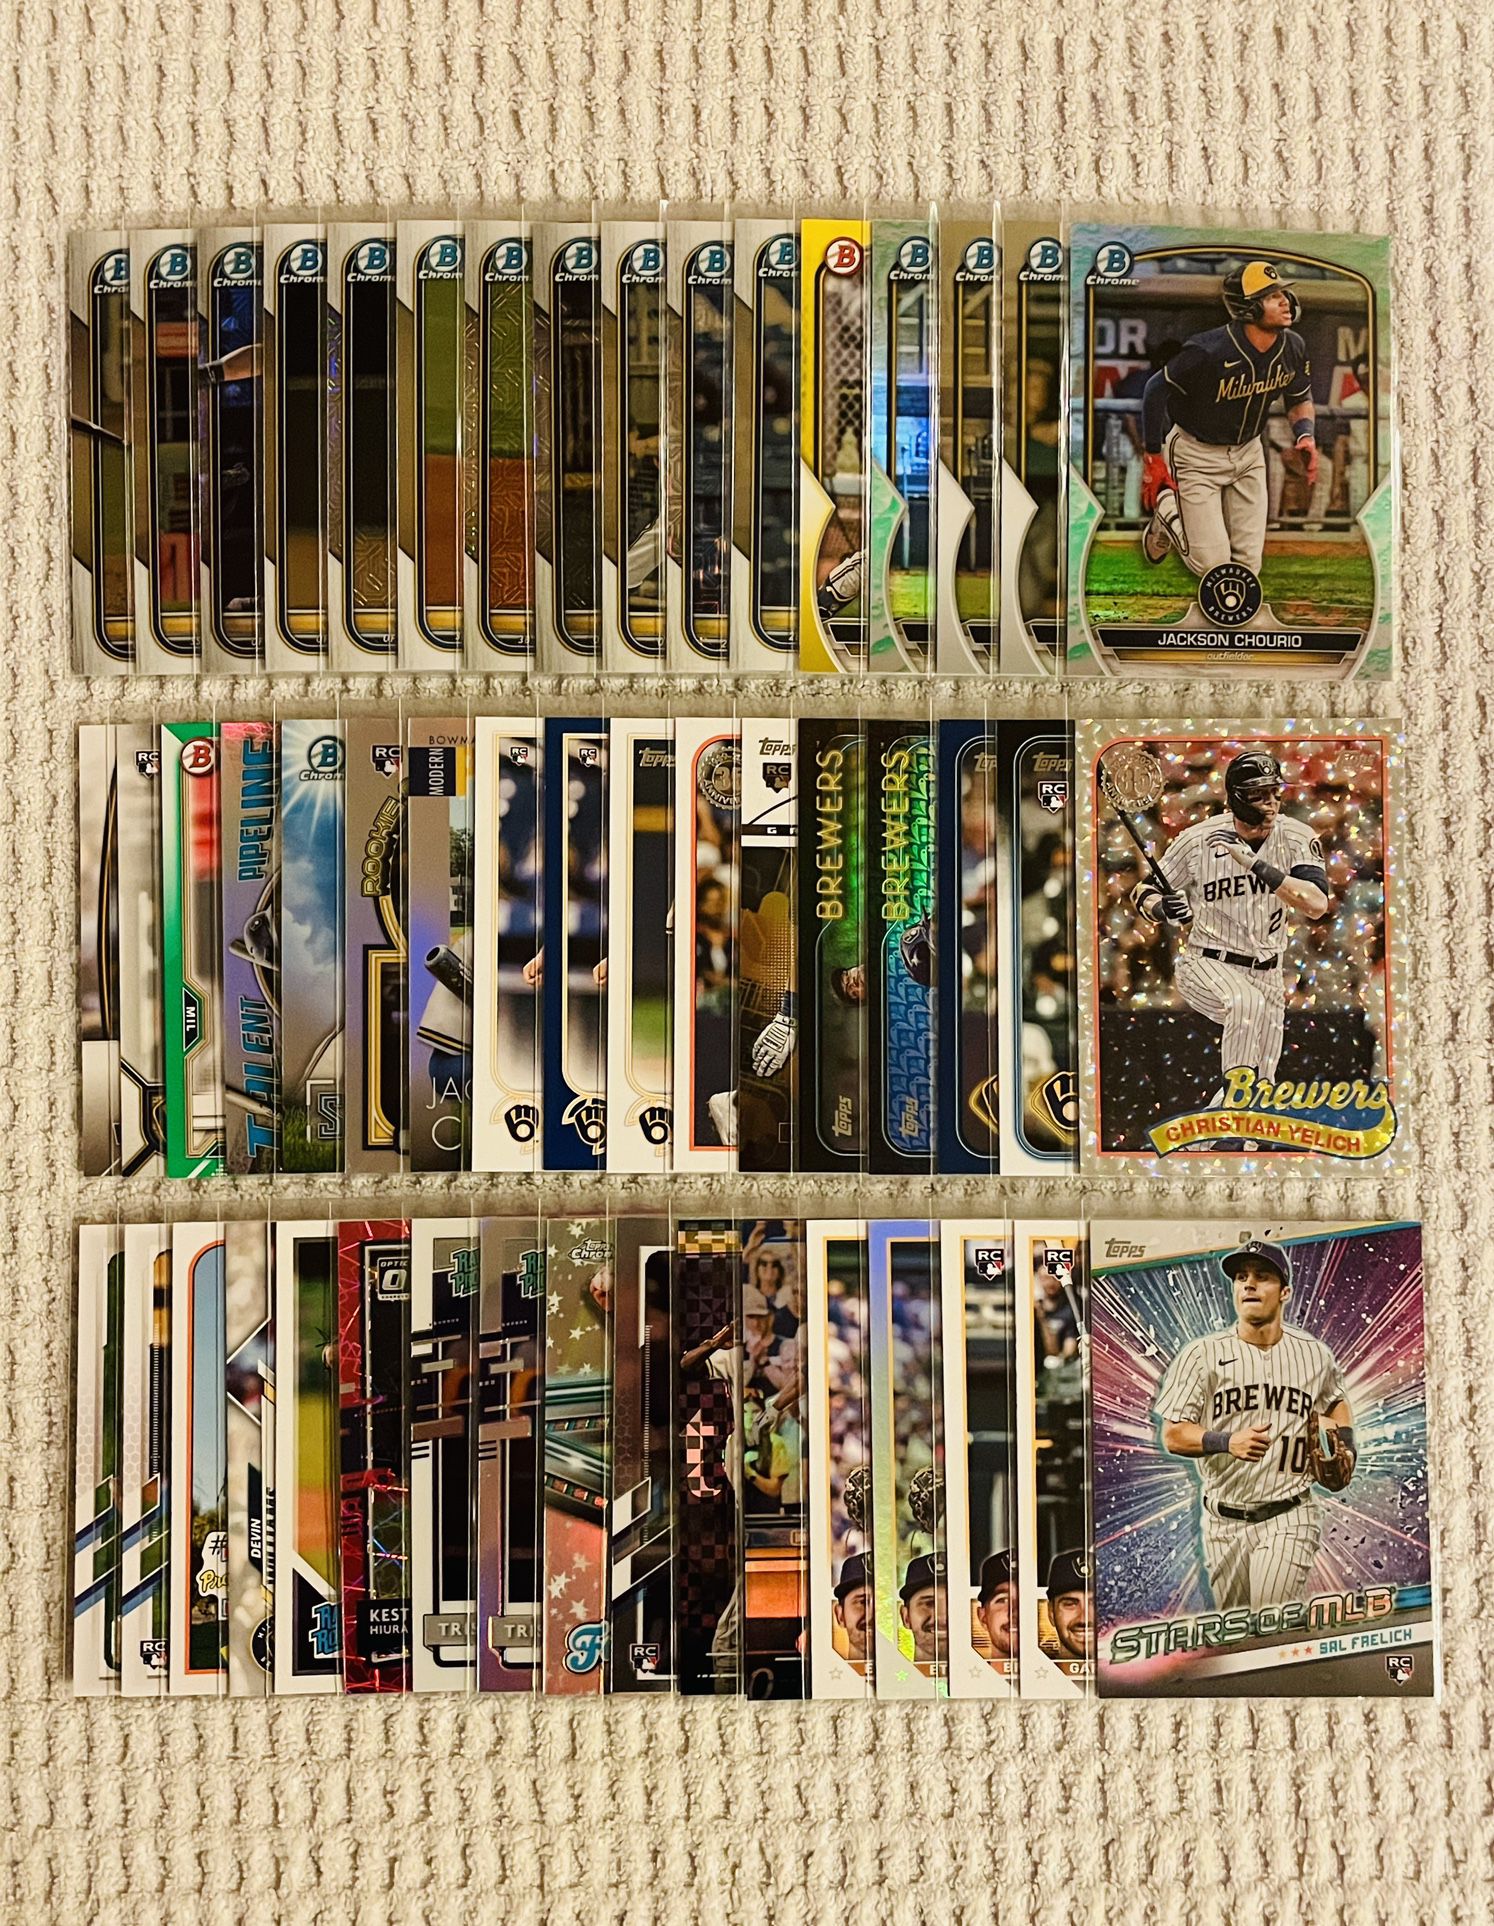 Milwaukee Brewers 50 Card Baseball Lot! Rookies, Prospects, Refractors, Parallels, Autographs, Short Prints, Case Hits, Variations & More!